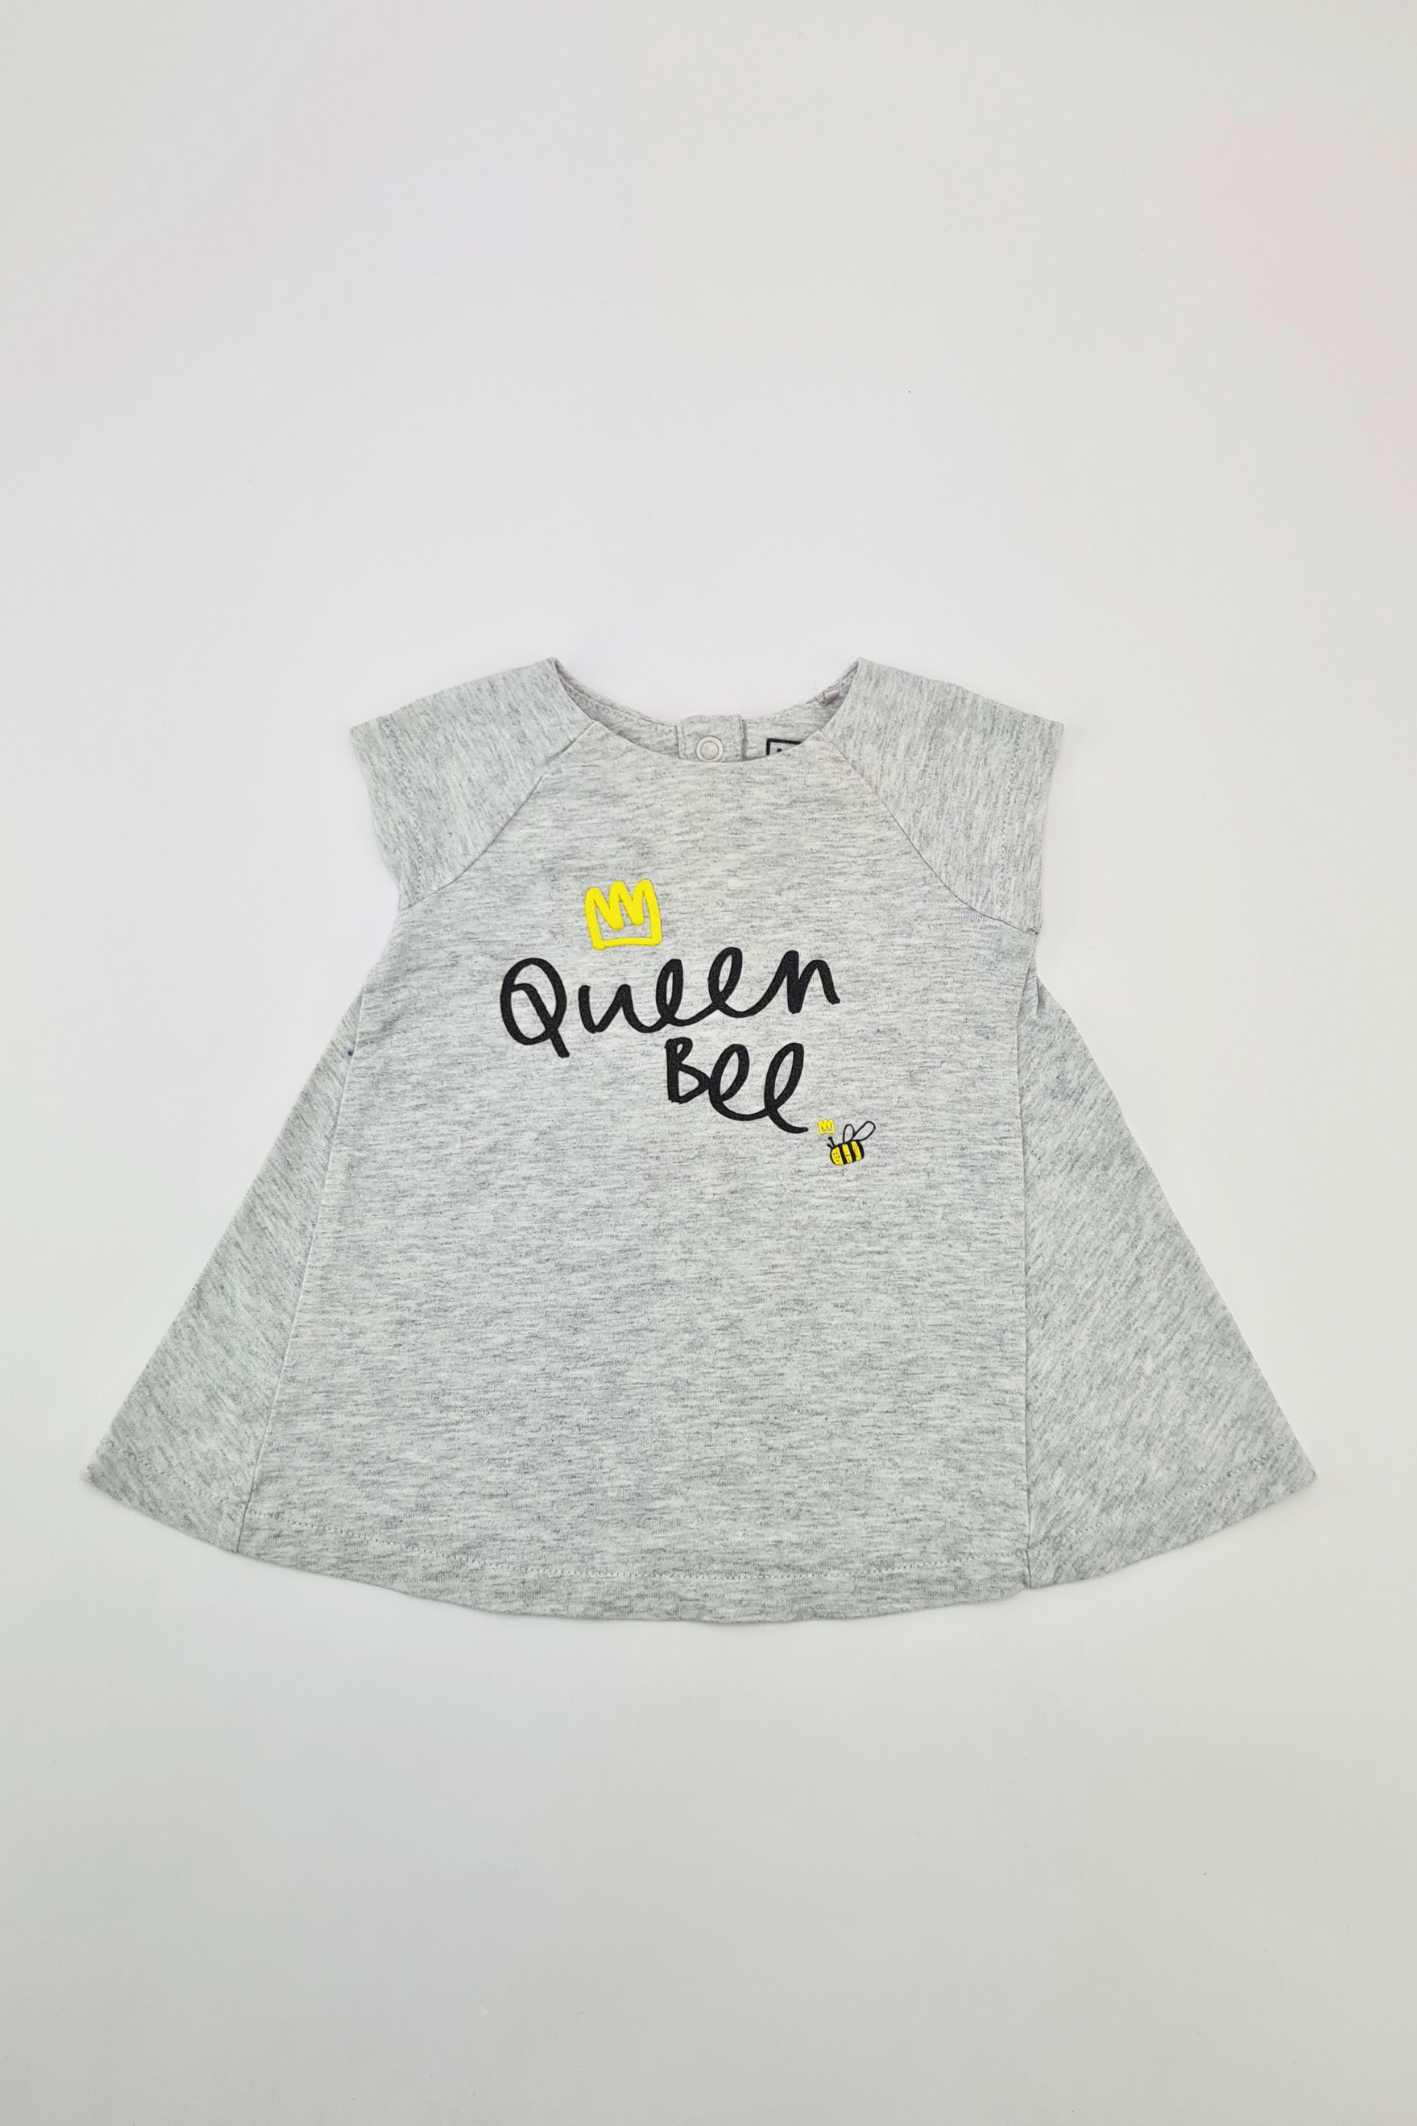 Nouveau-né - Robe grise 'My Queen Bee' 10lbs (My K)